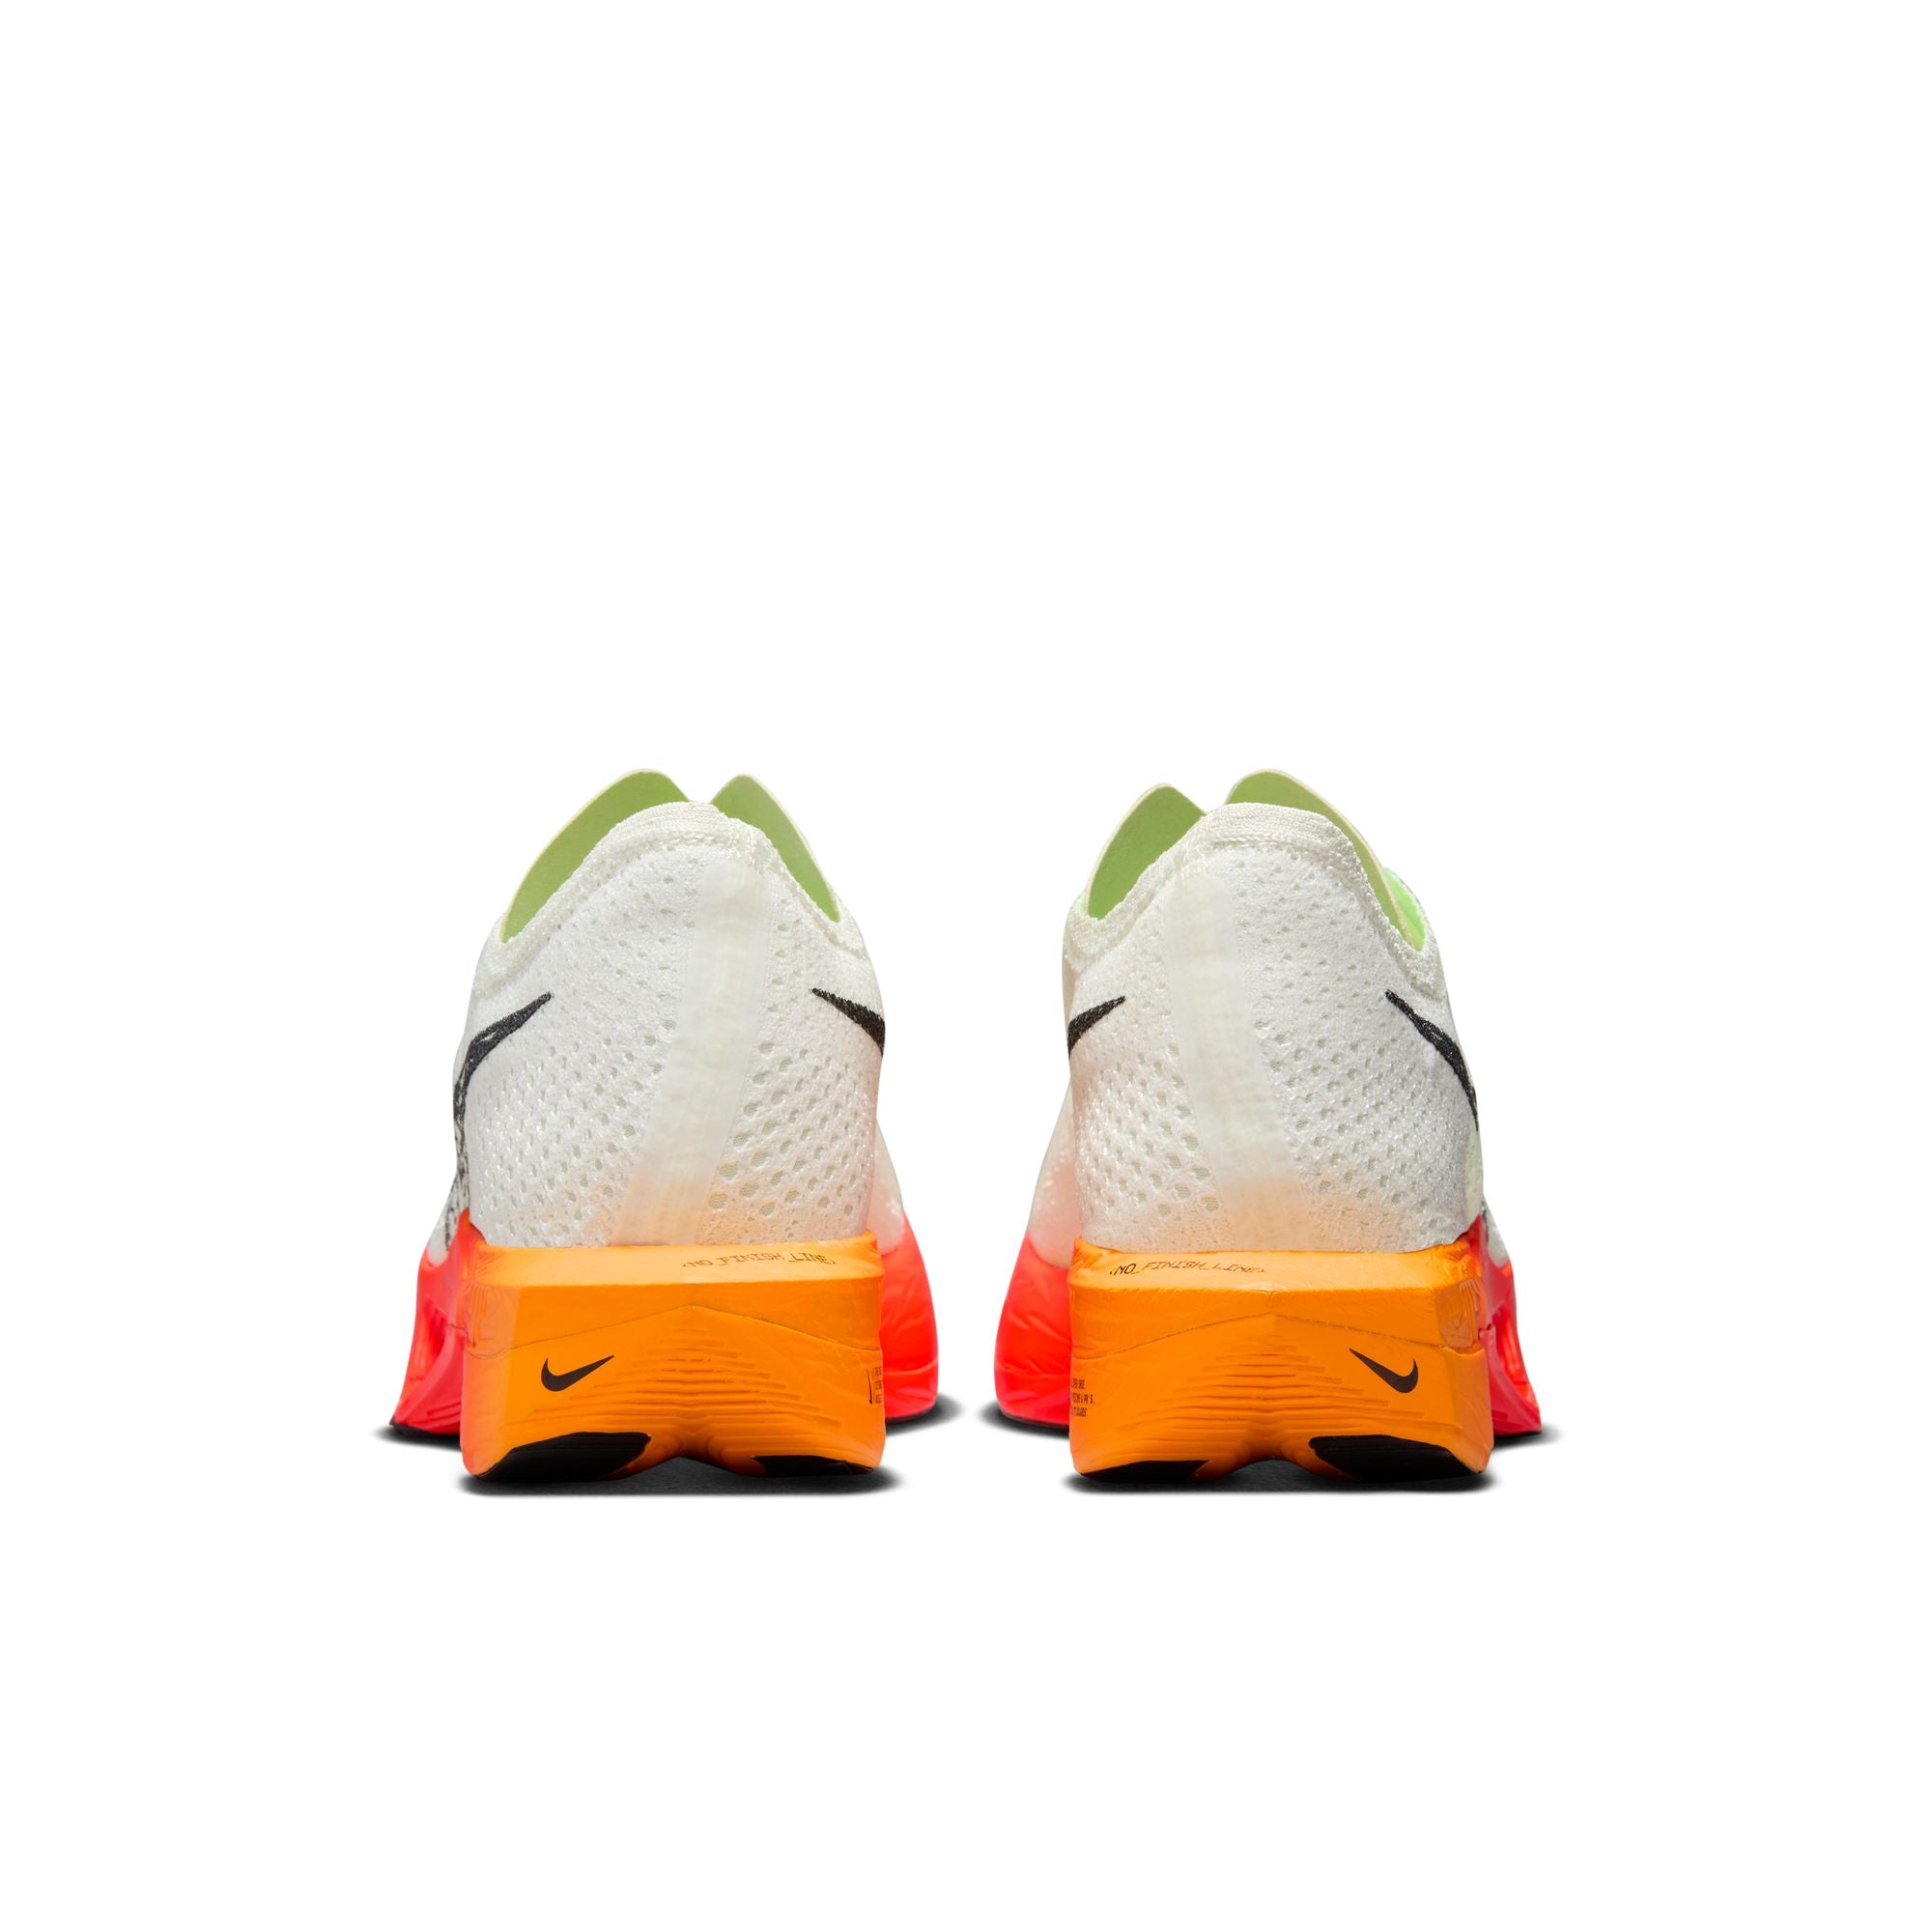 back view of mens vaporfly 3